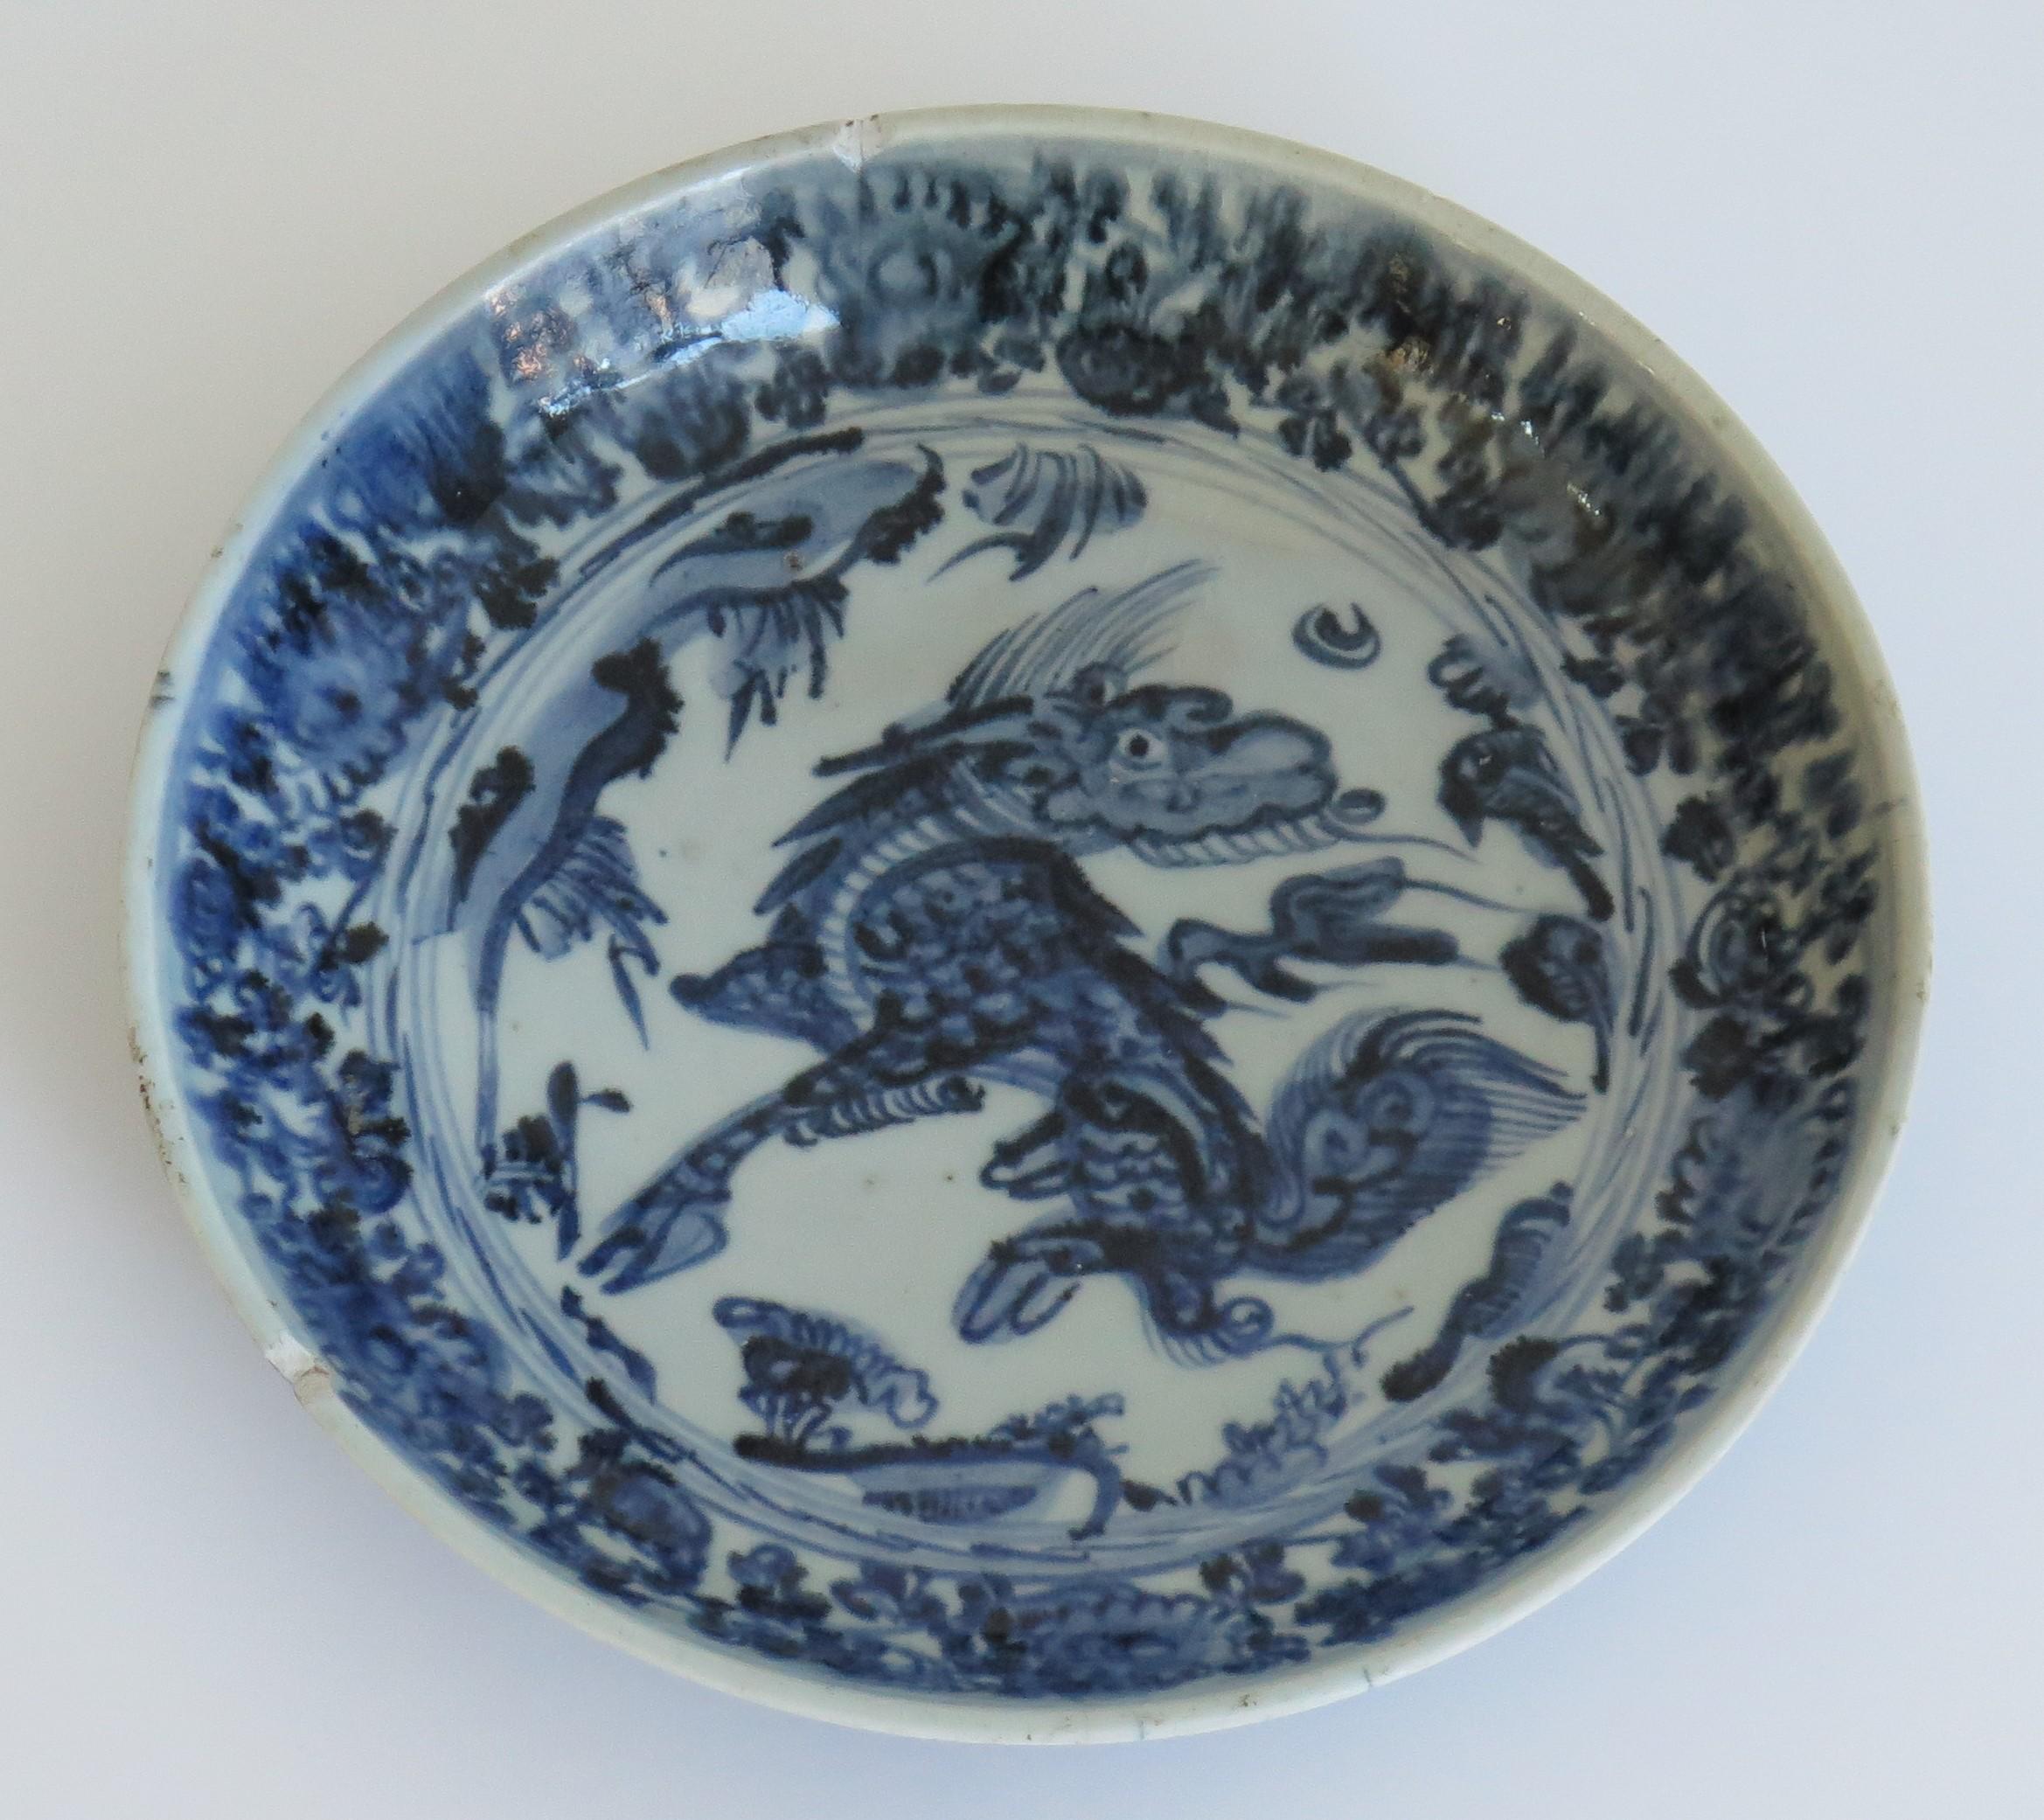 17th Century Chinese Porcelain Dish or Deep Plate Blue and White, Ming Wanli circa 1600